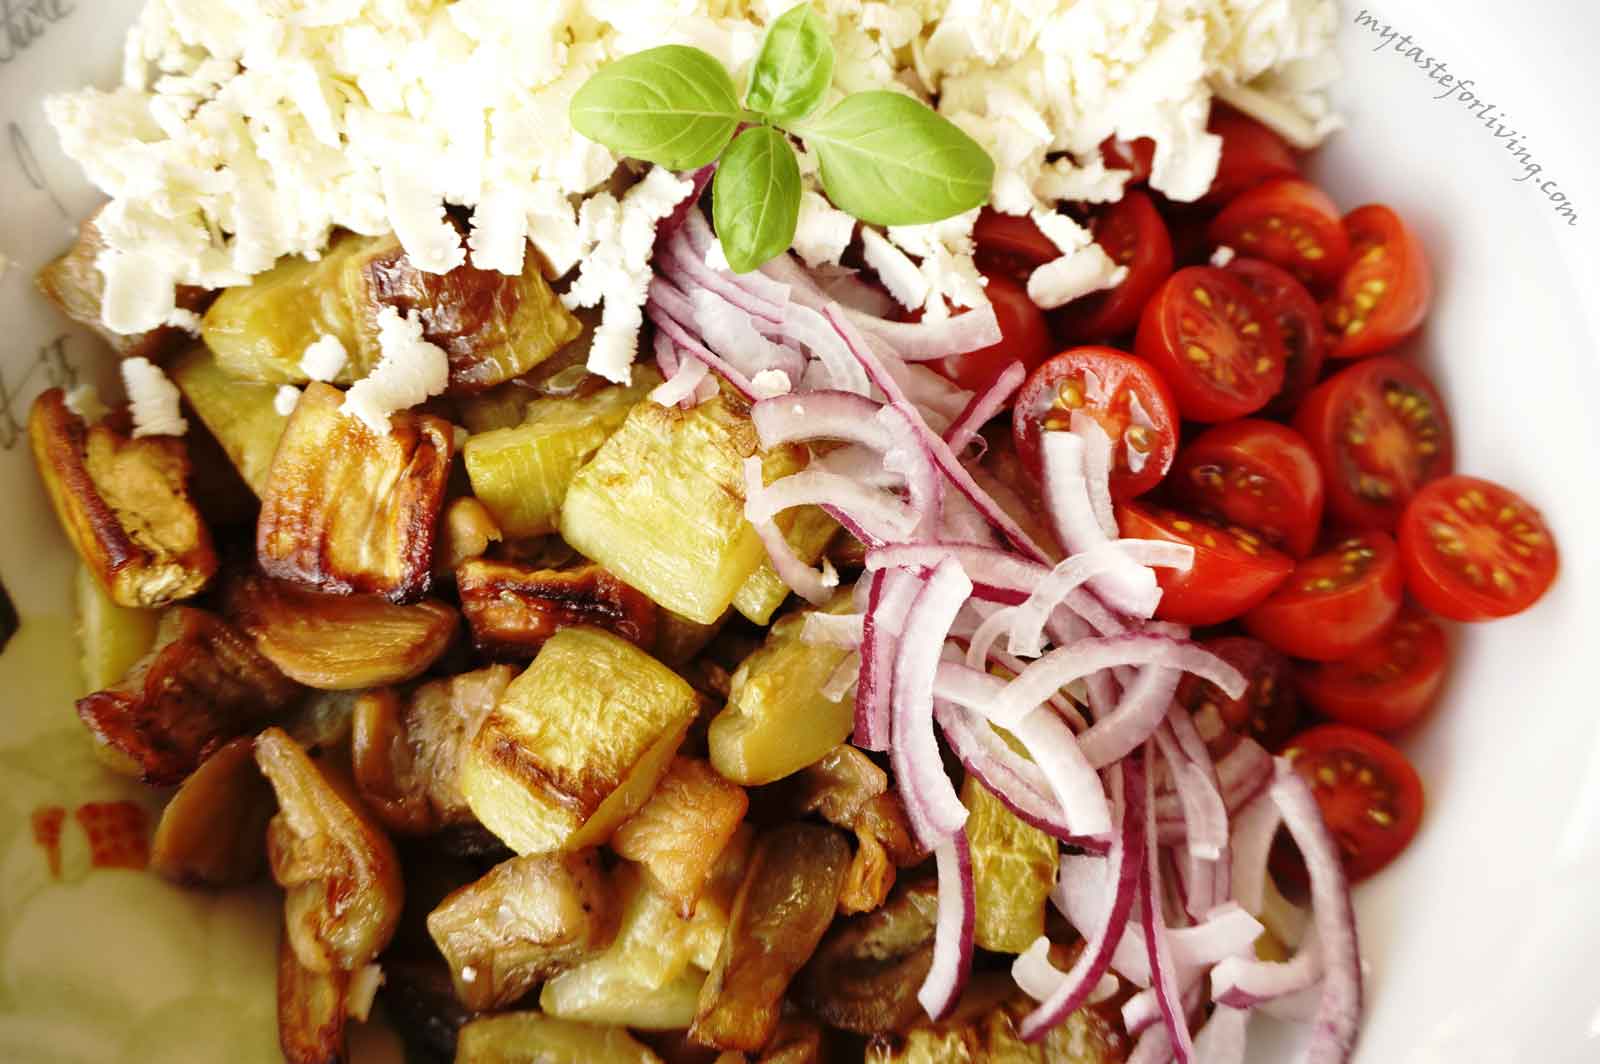 Roasted zucchini and eggplant salad with cherry tomatoes, red onion and feta cheese.